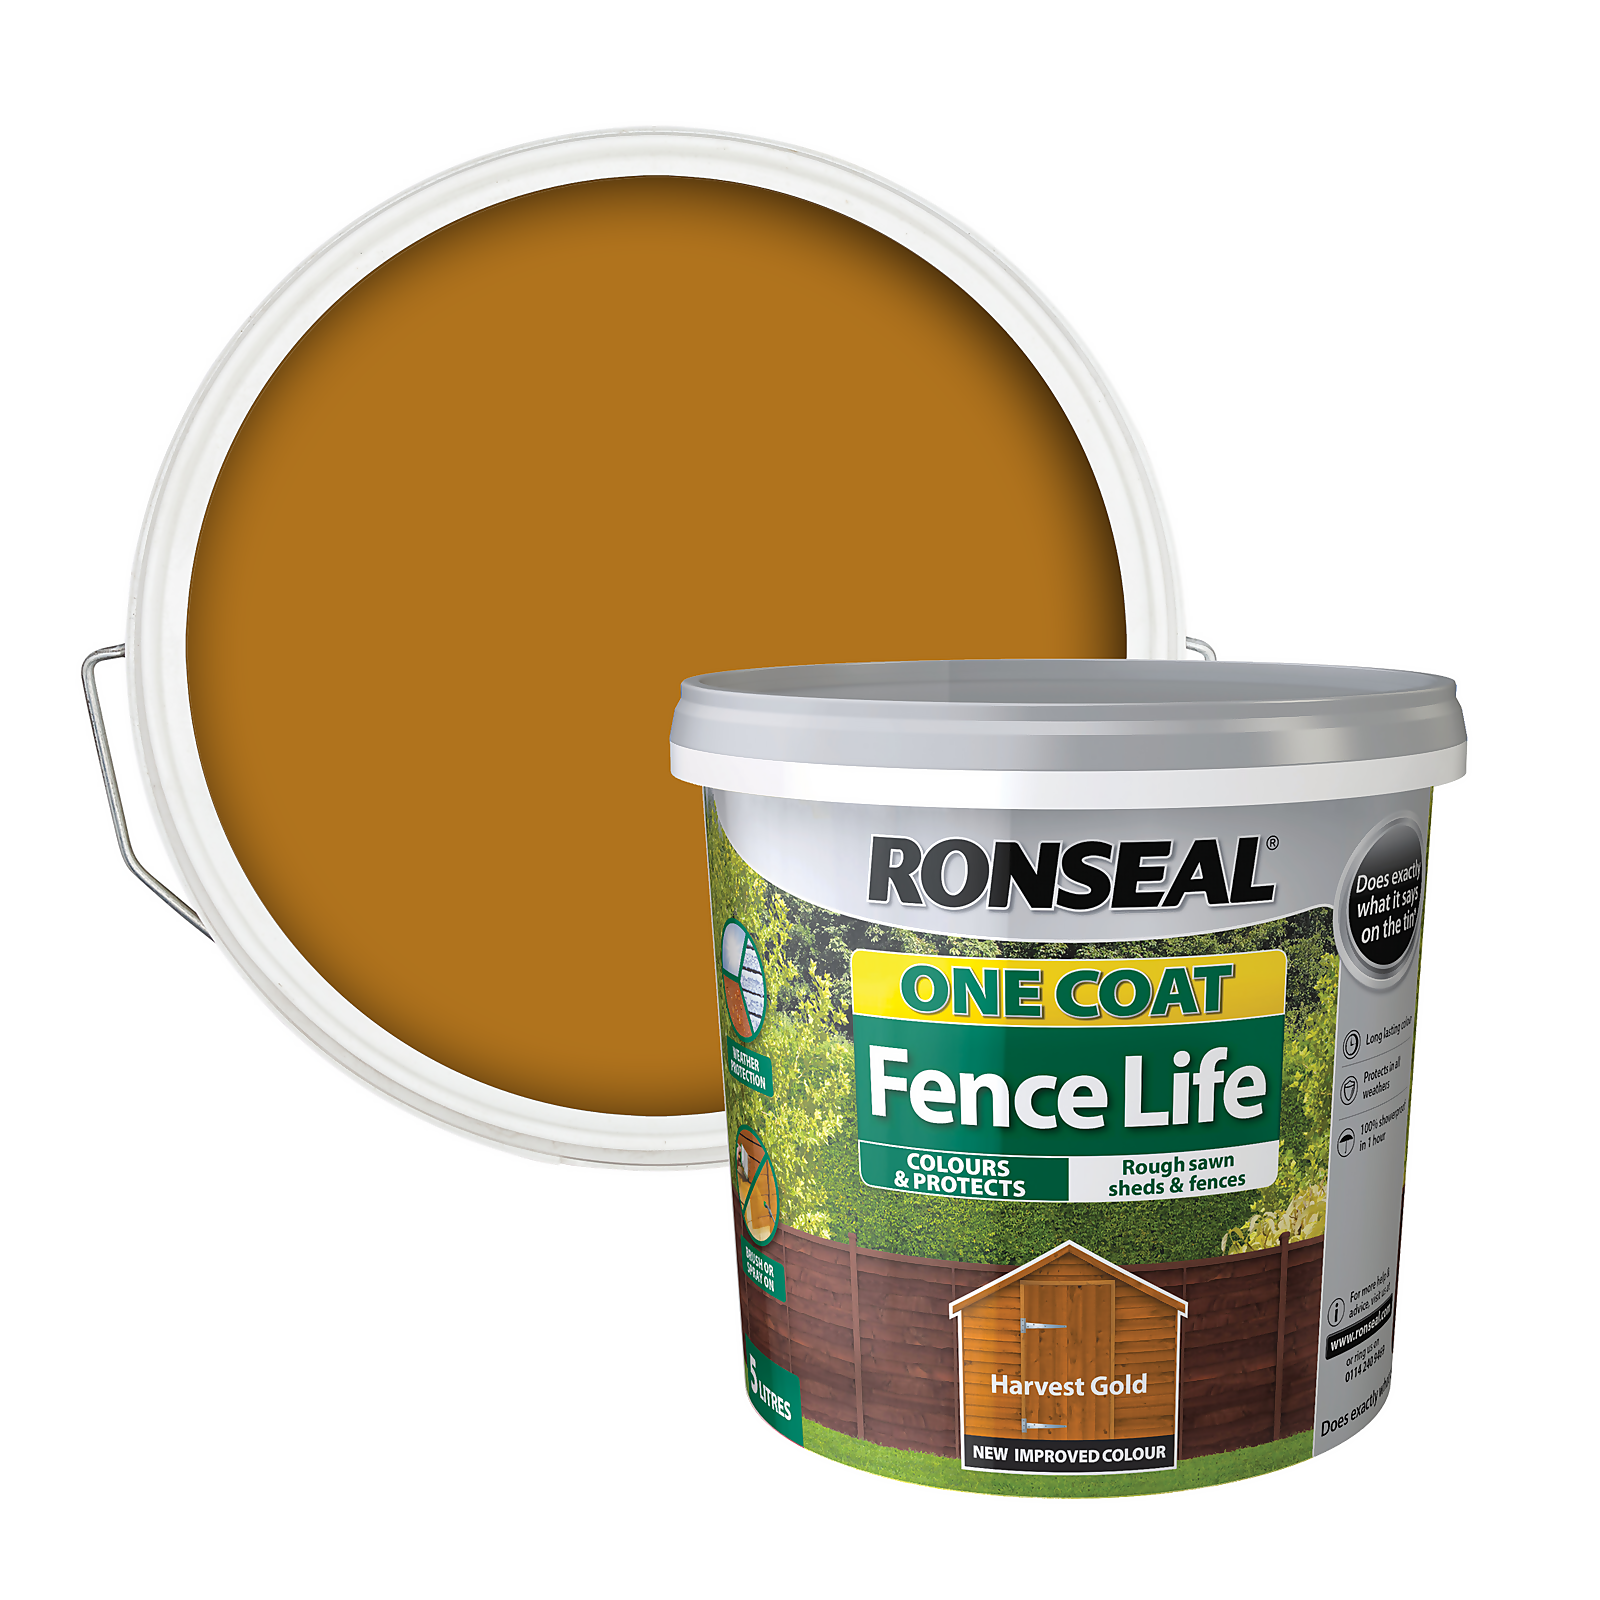 Ronseal One Coat Fence Life Paint Harvest Gold - 5L